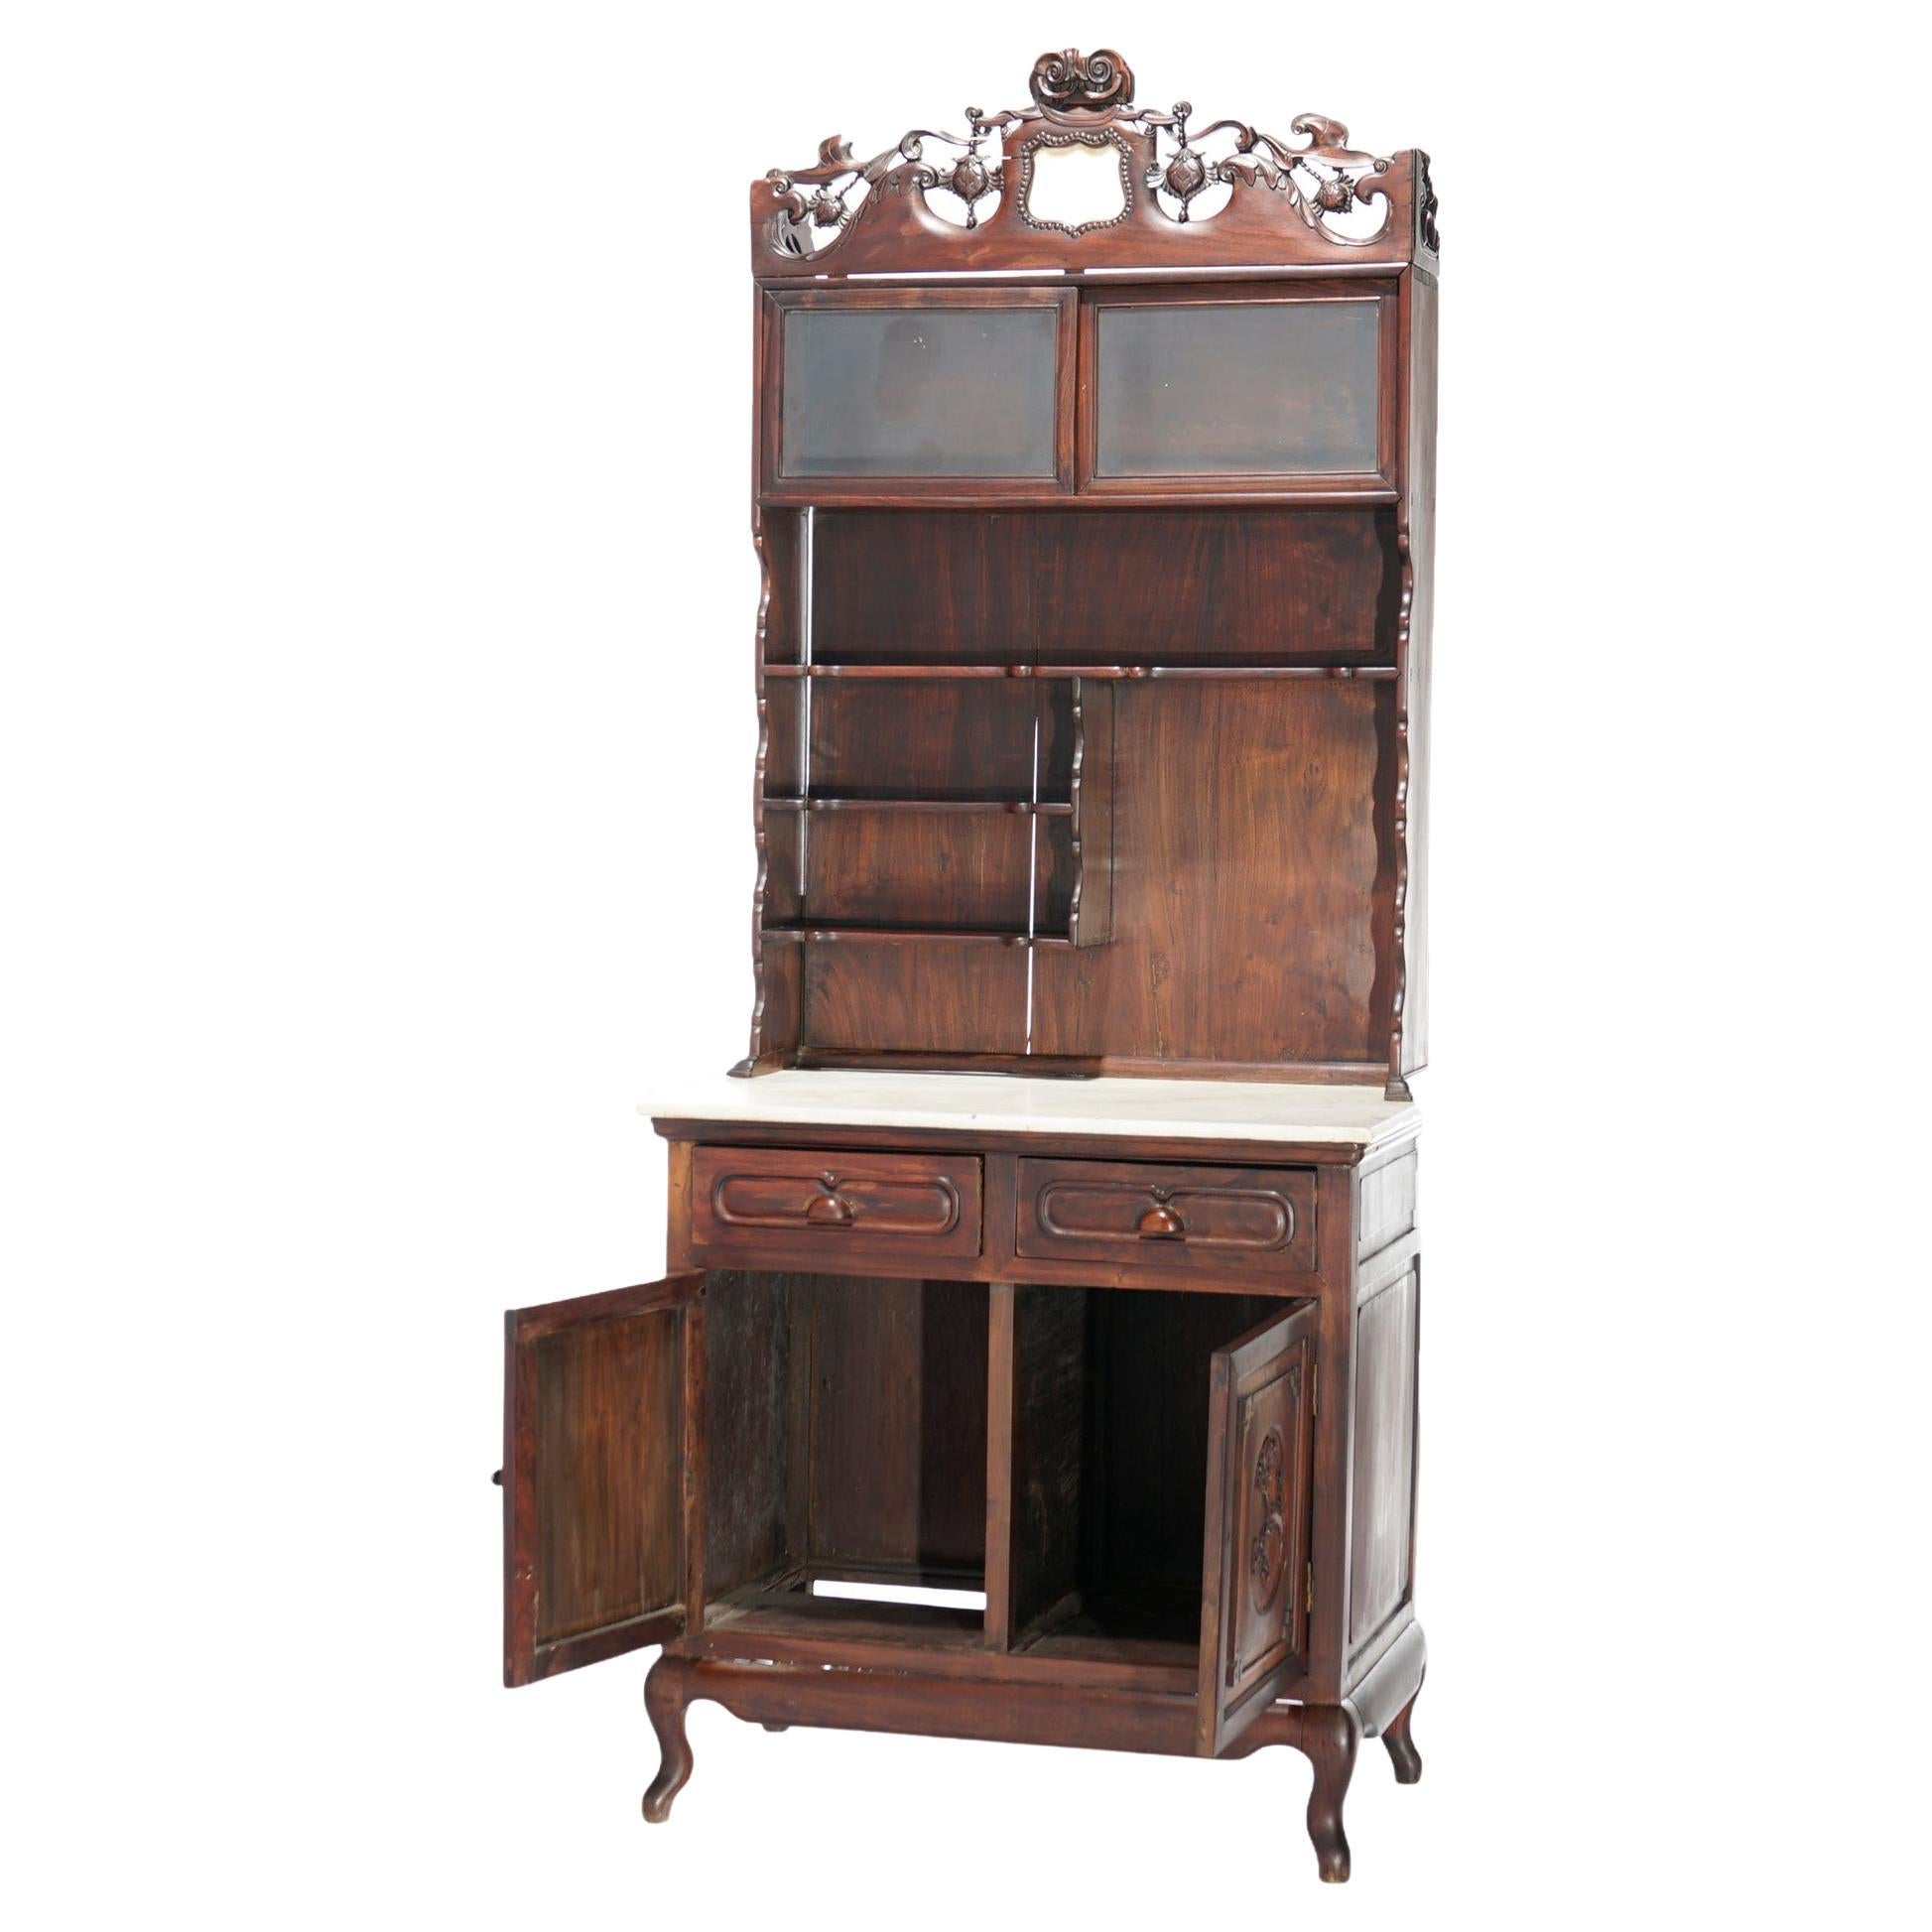 An antique Chinese display cabinet offers hardwood construction with pierced foliate crest over shelving unit which surmounts lower marble top case with two upper shelves and double foliate carved door cabinet, raised on cabriole legs,